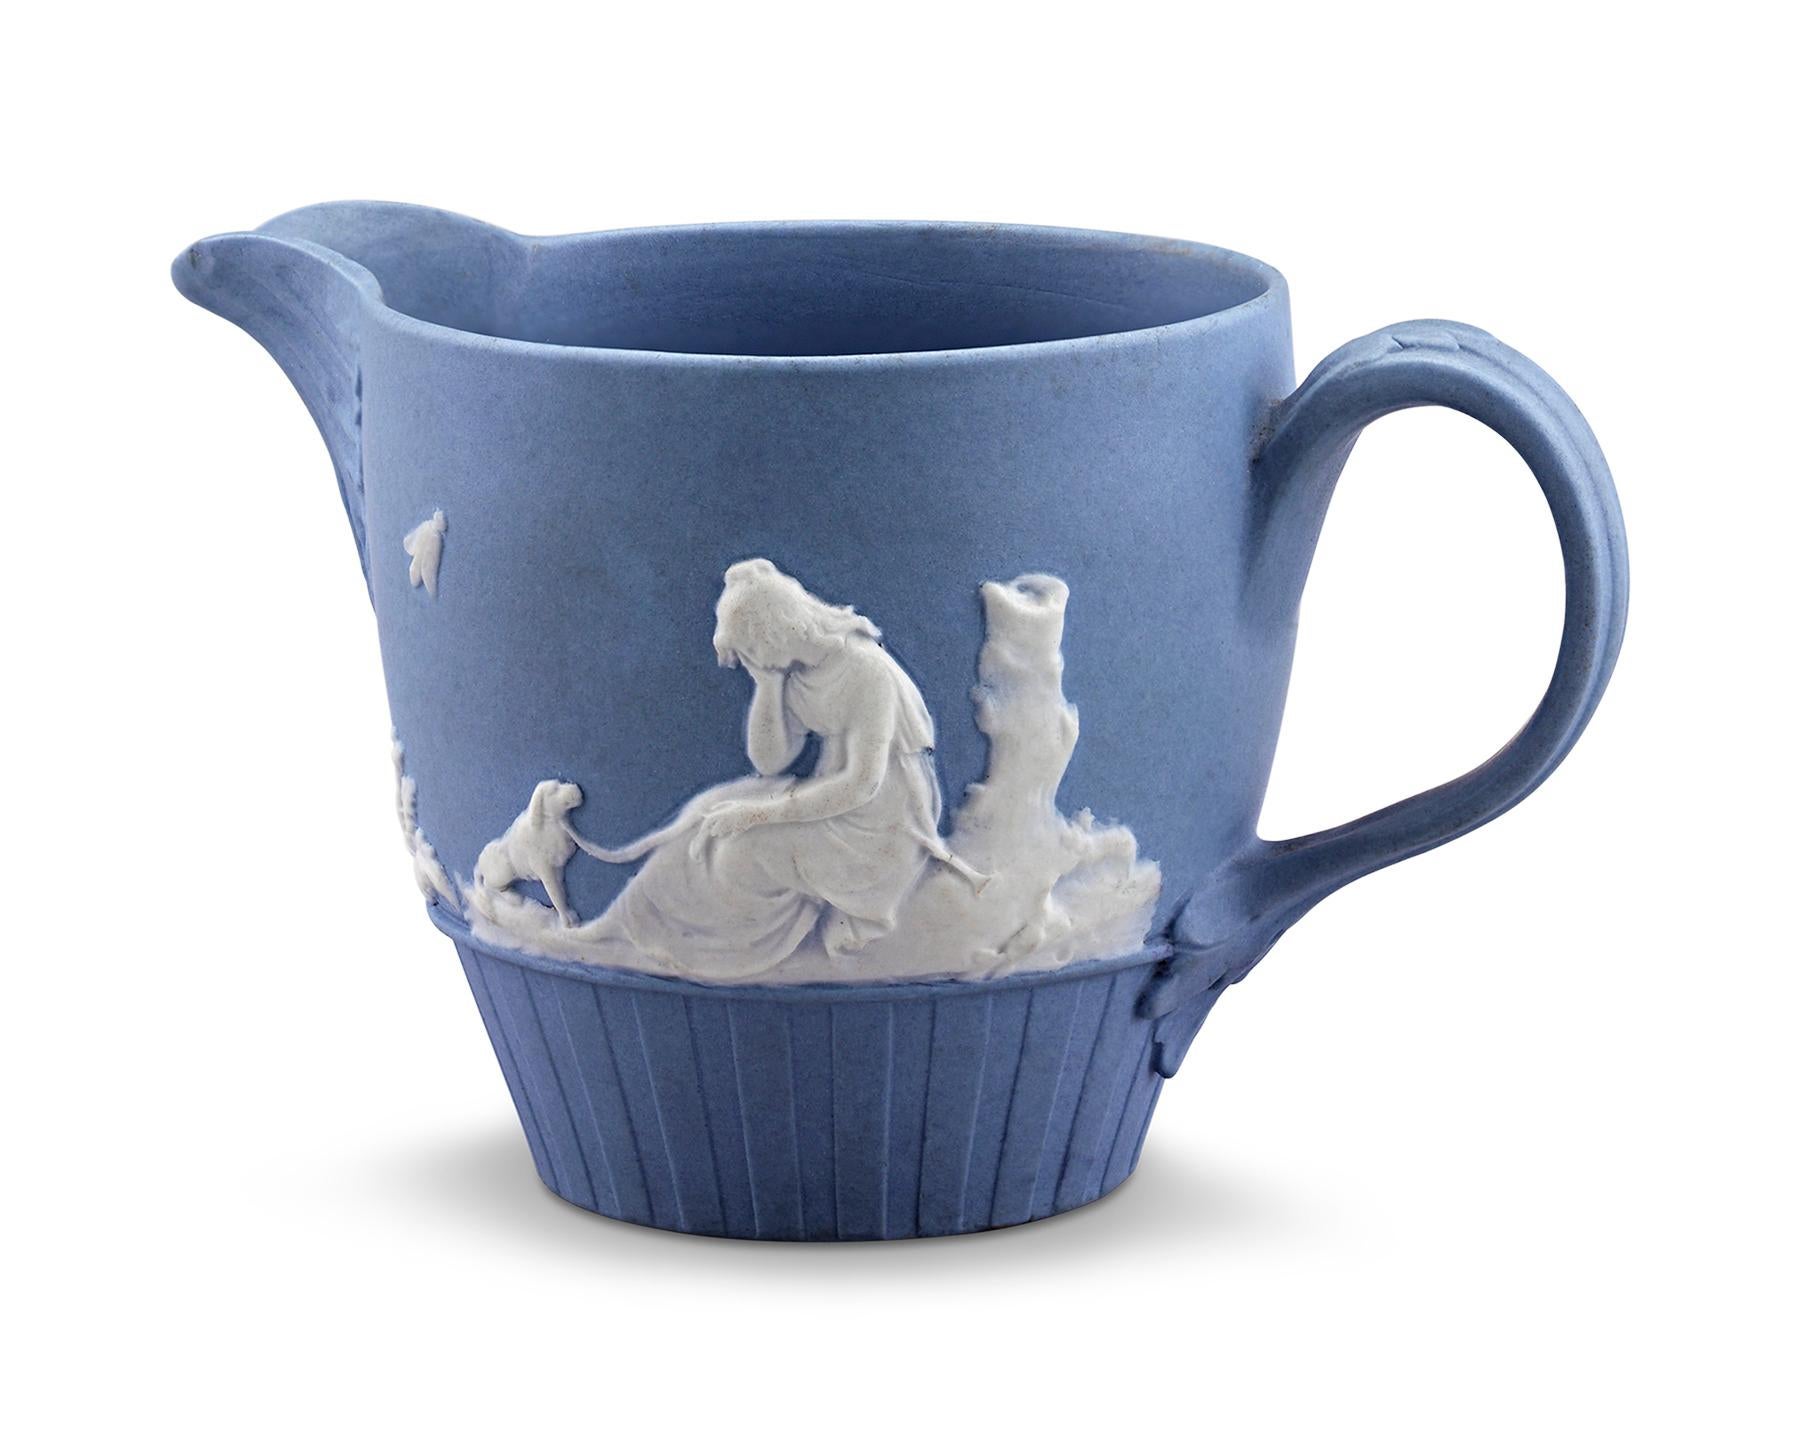 Crafted by Wedgwood, this diminutive creamer jug displays the firm’s iconic “Wedgwood blue” jasperware. A Neoclassical scene depicting a sorrowful goddess with her dog is silhouetted in bold white relief on one side, while the other side features a